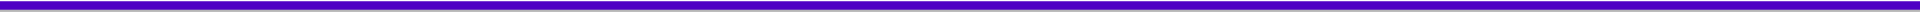 A purple background with black border and a blue area.